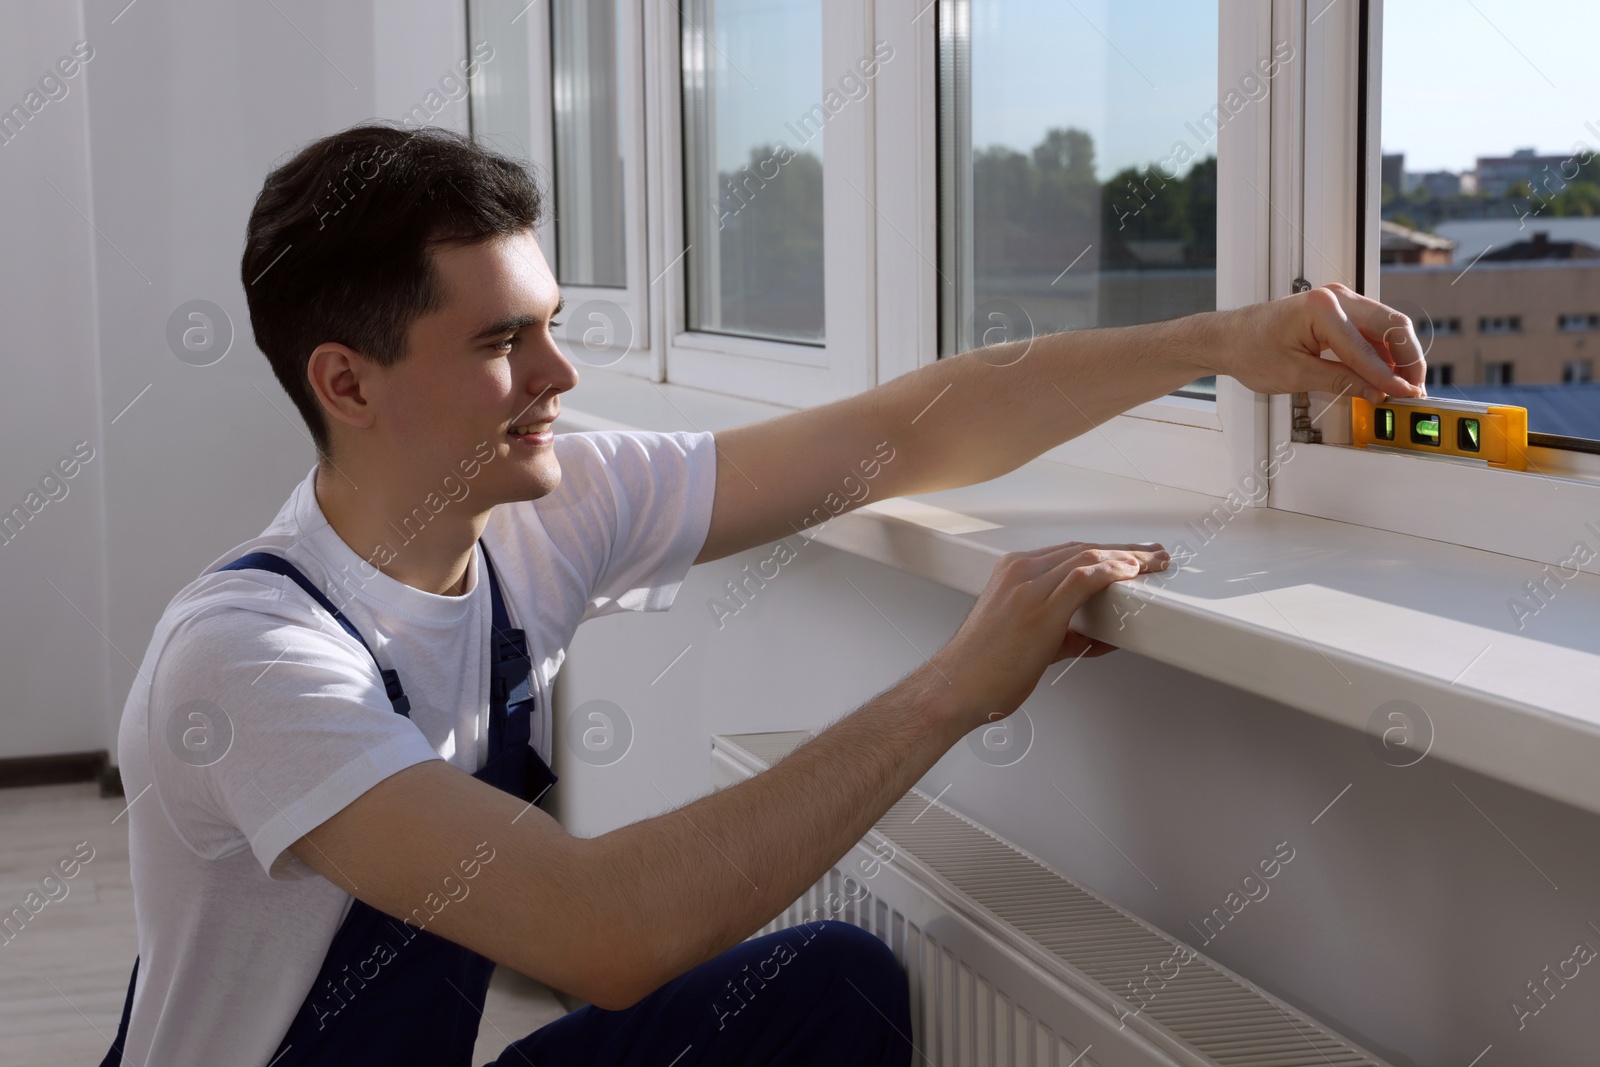 Photo of Worker using bubble level after plastic window installation indoors